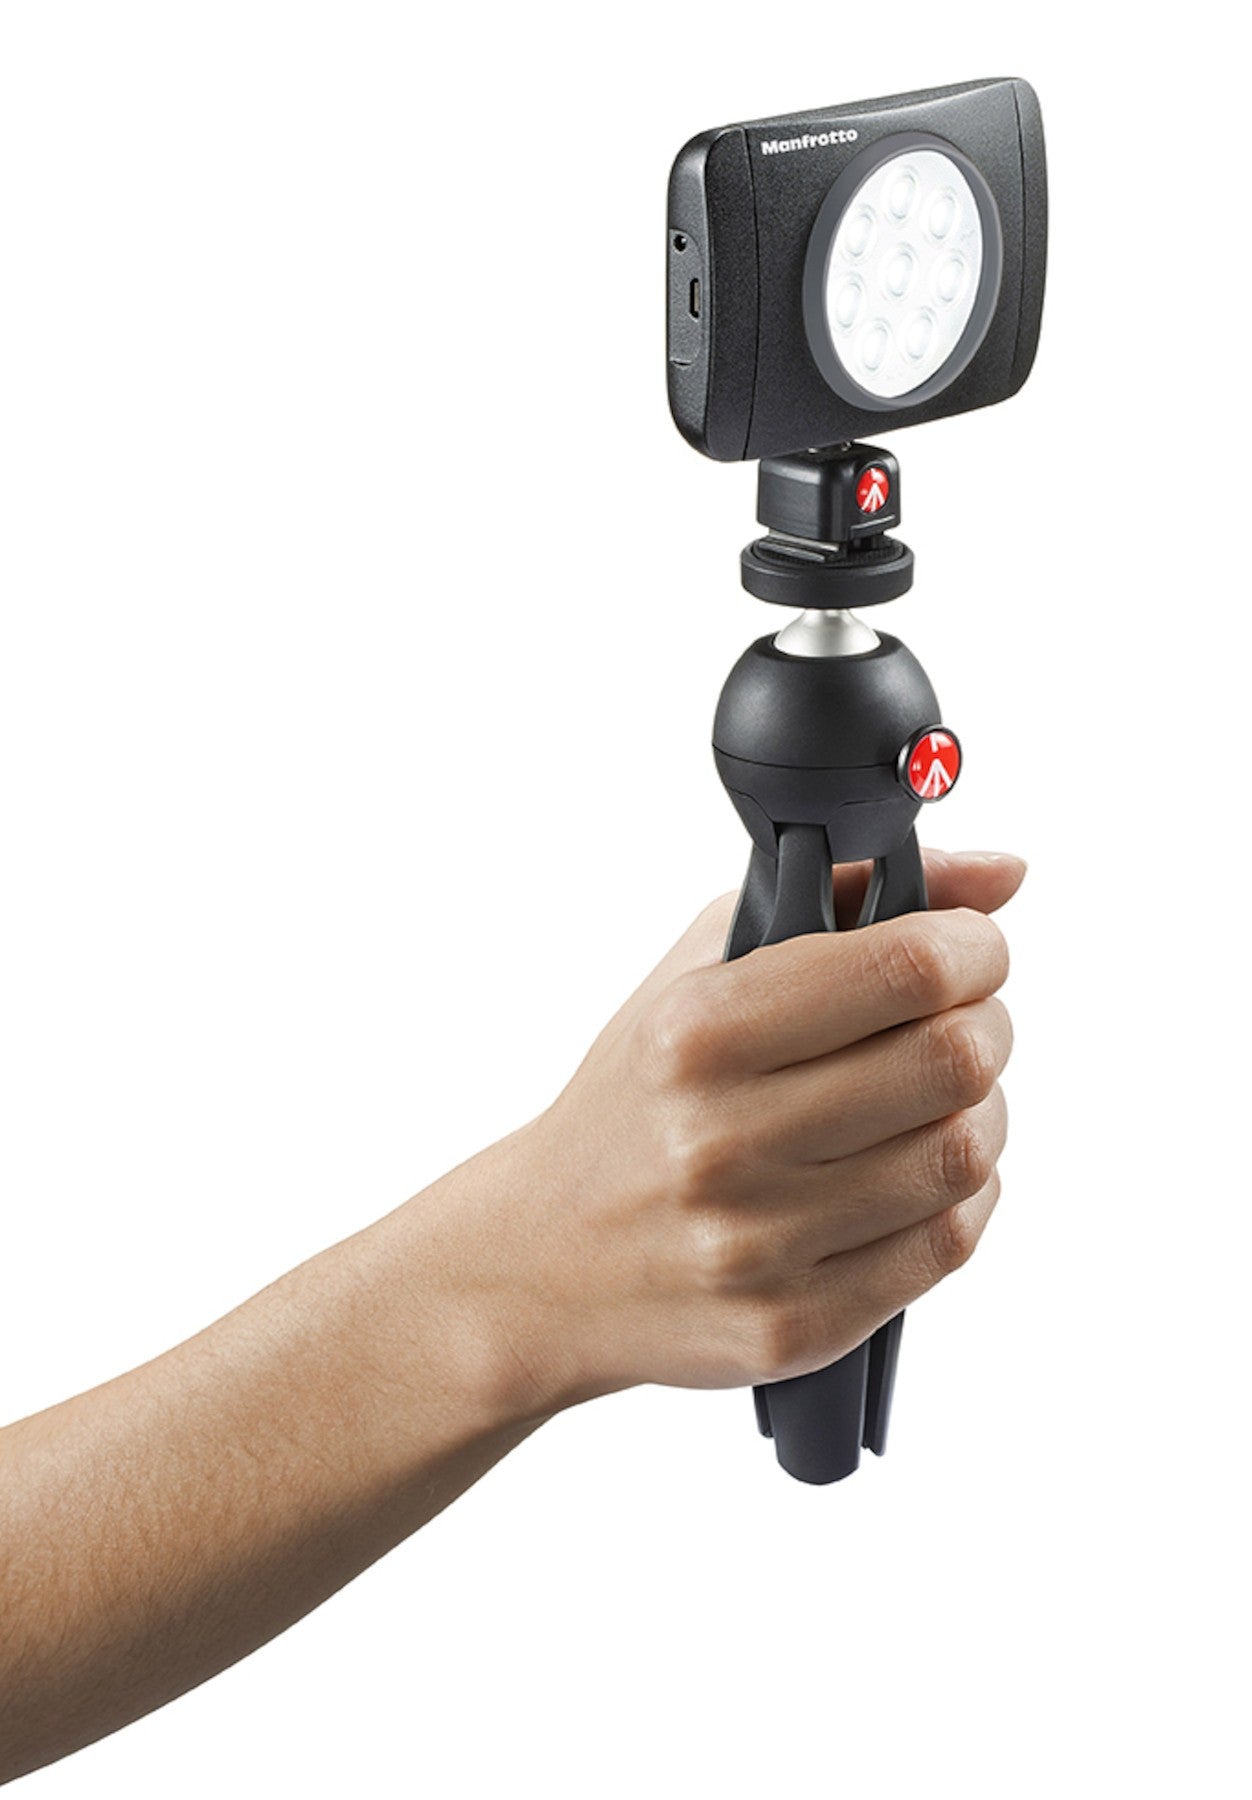 Manfrotto Lumie Series Muse LED Light, lighting led lights, Manfrotto - Pictureline  - 6